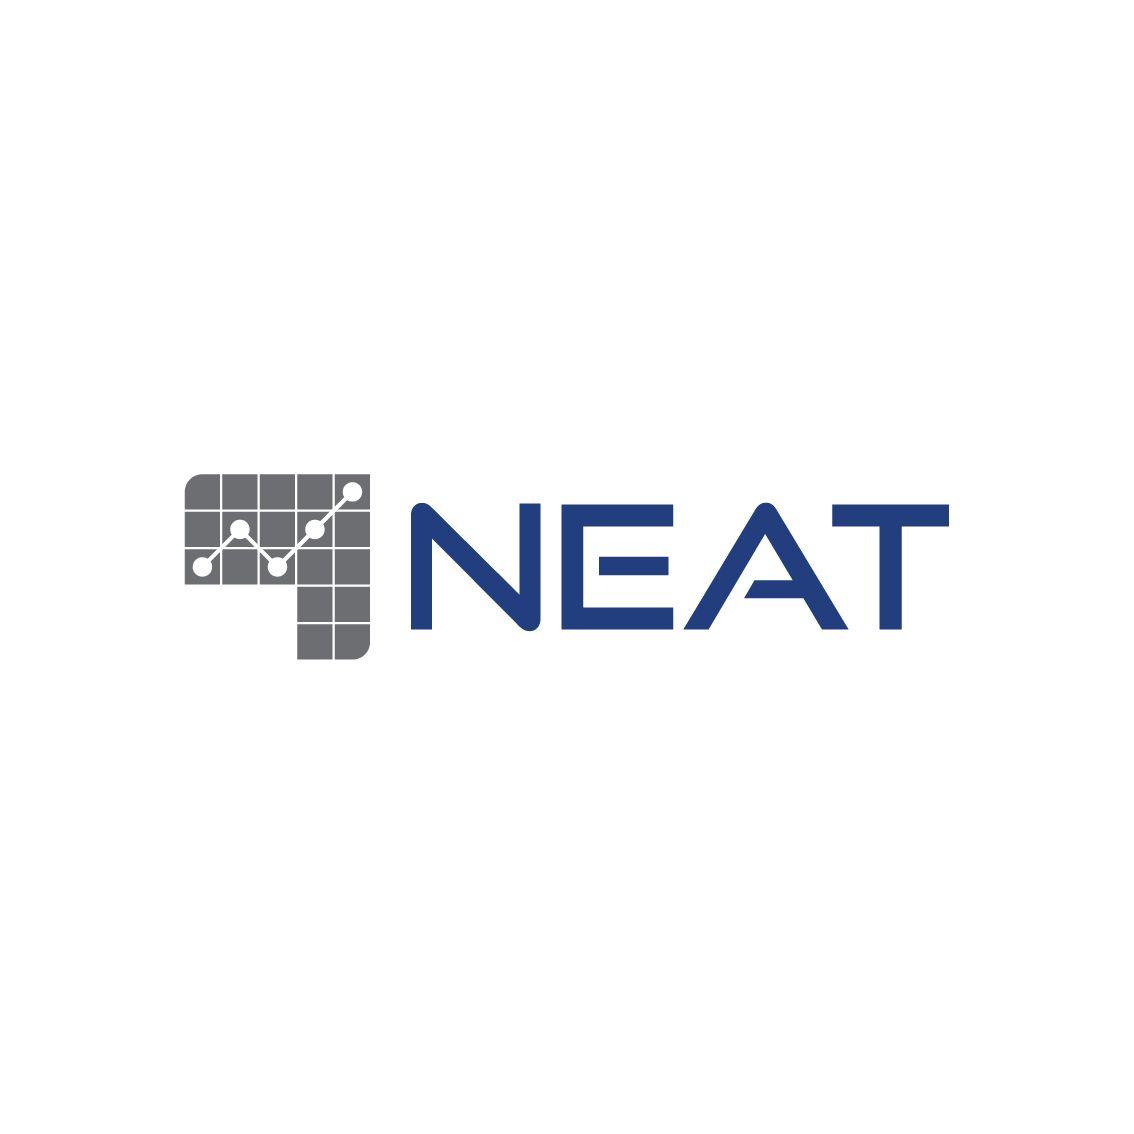 Neat Logo - Modern, Bold, Software Logo Design for neat by labscastle | Design ...